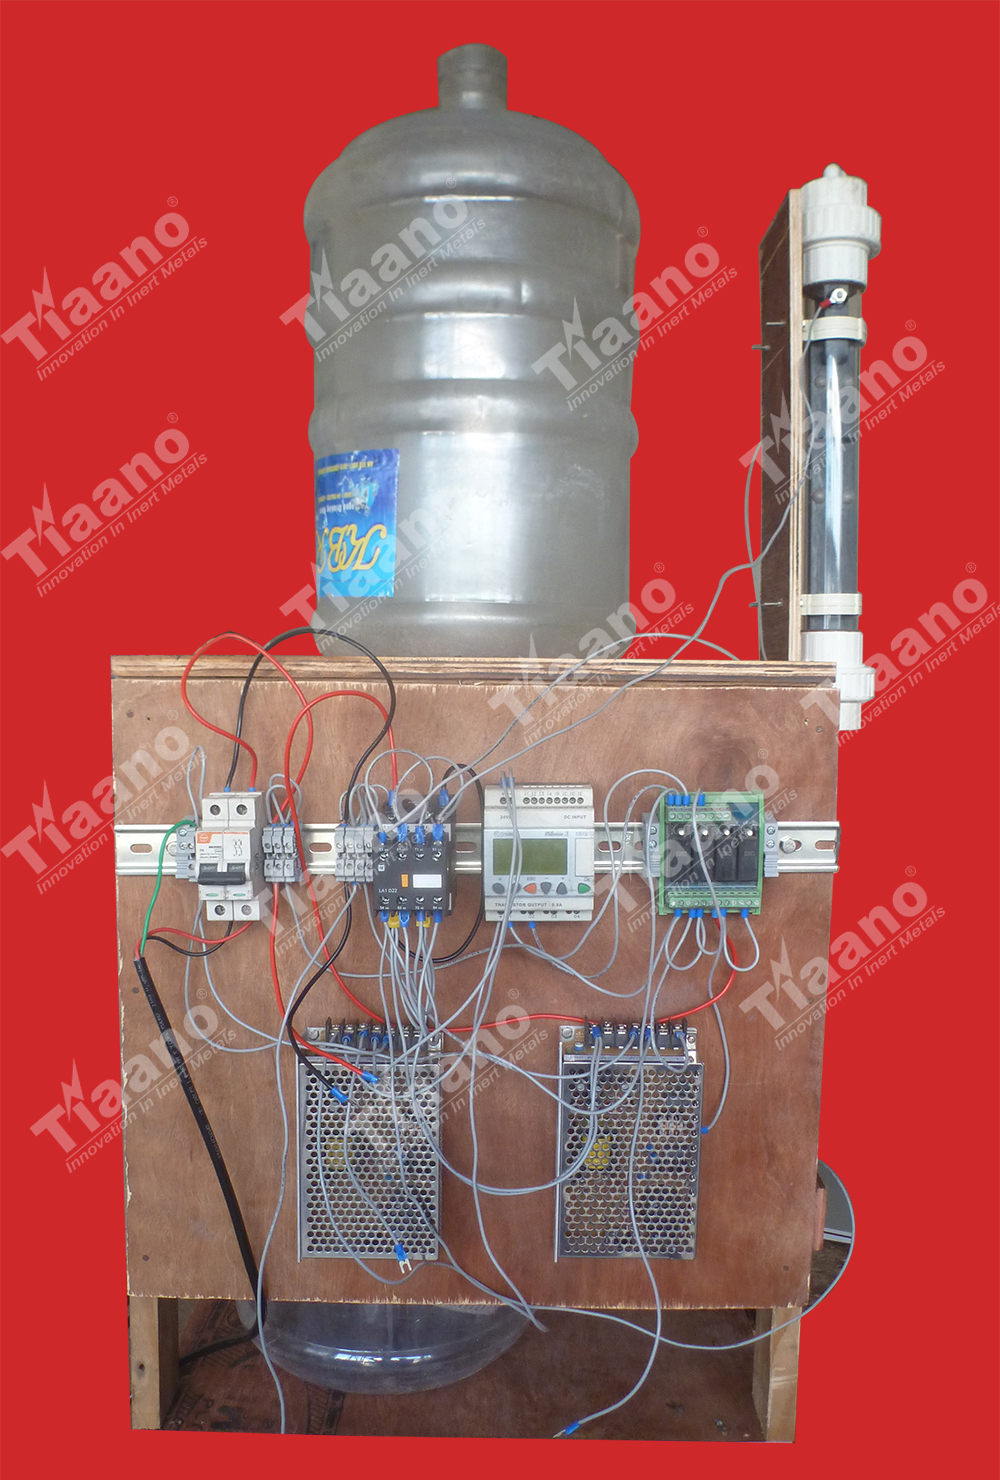 Manufacture and Supply of Drinking Water Disinfection System